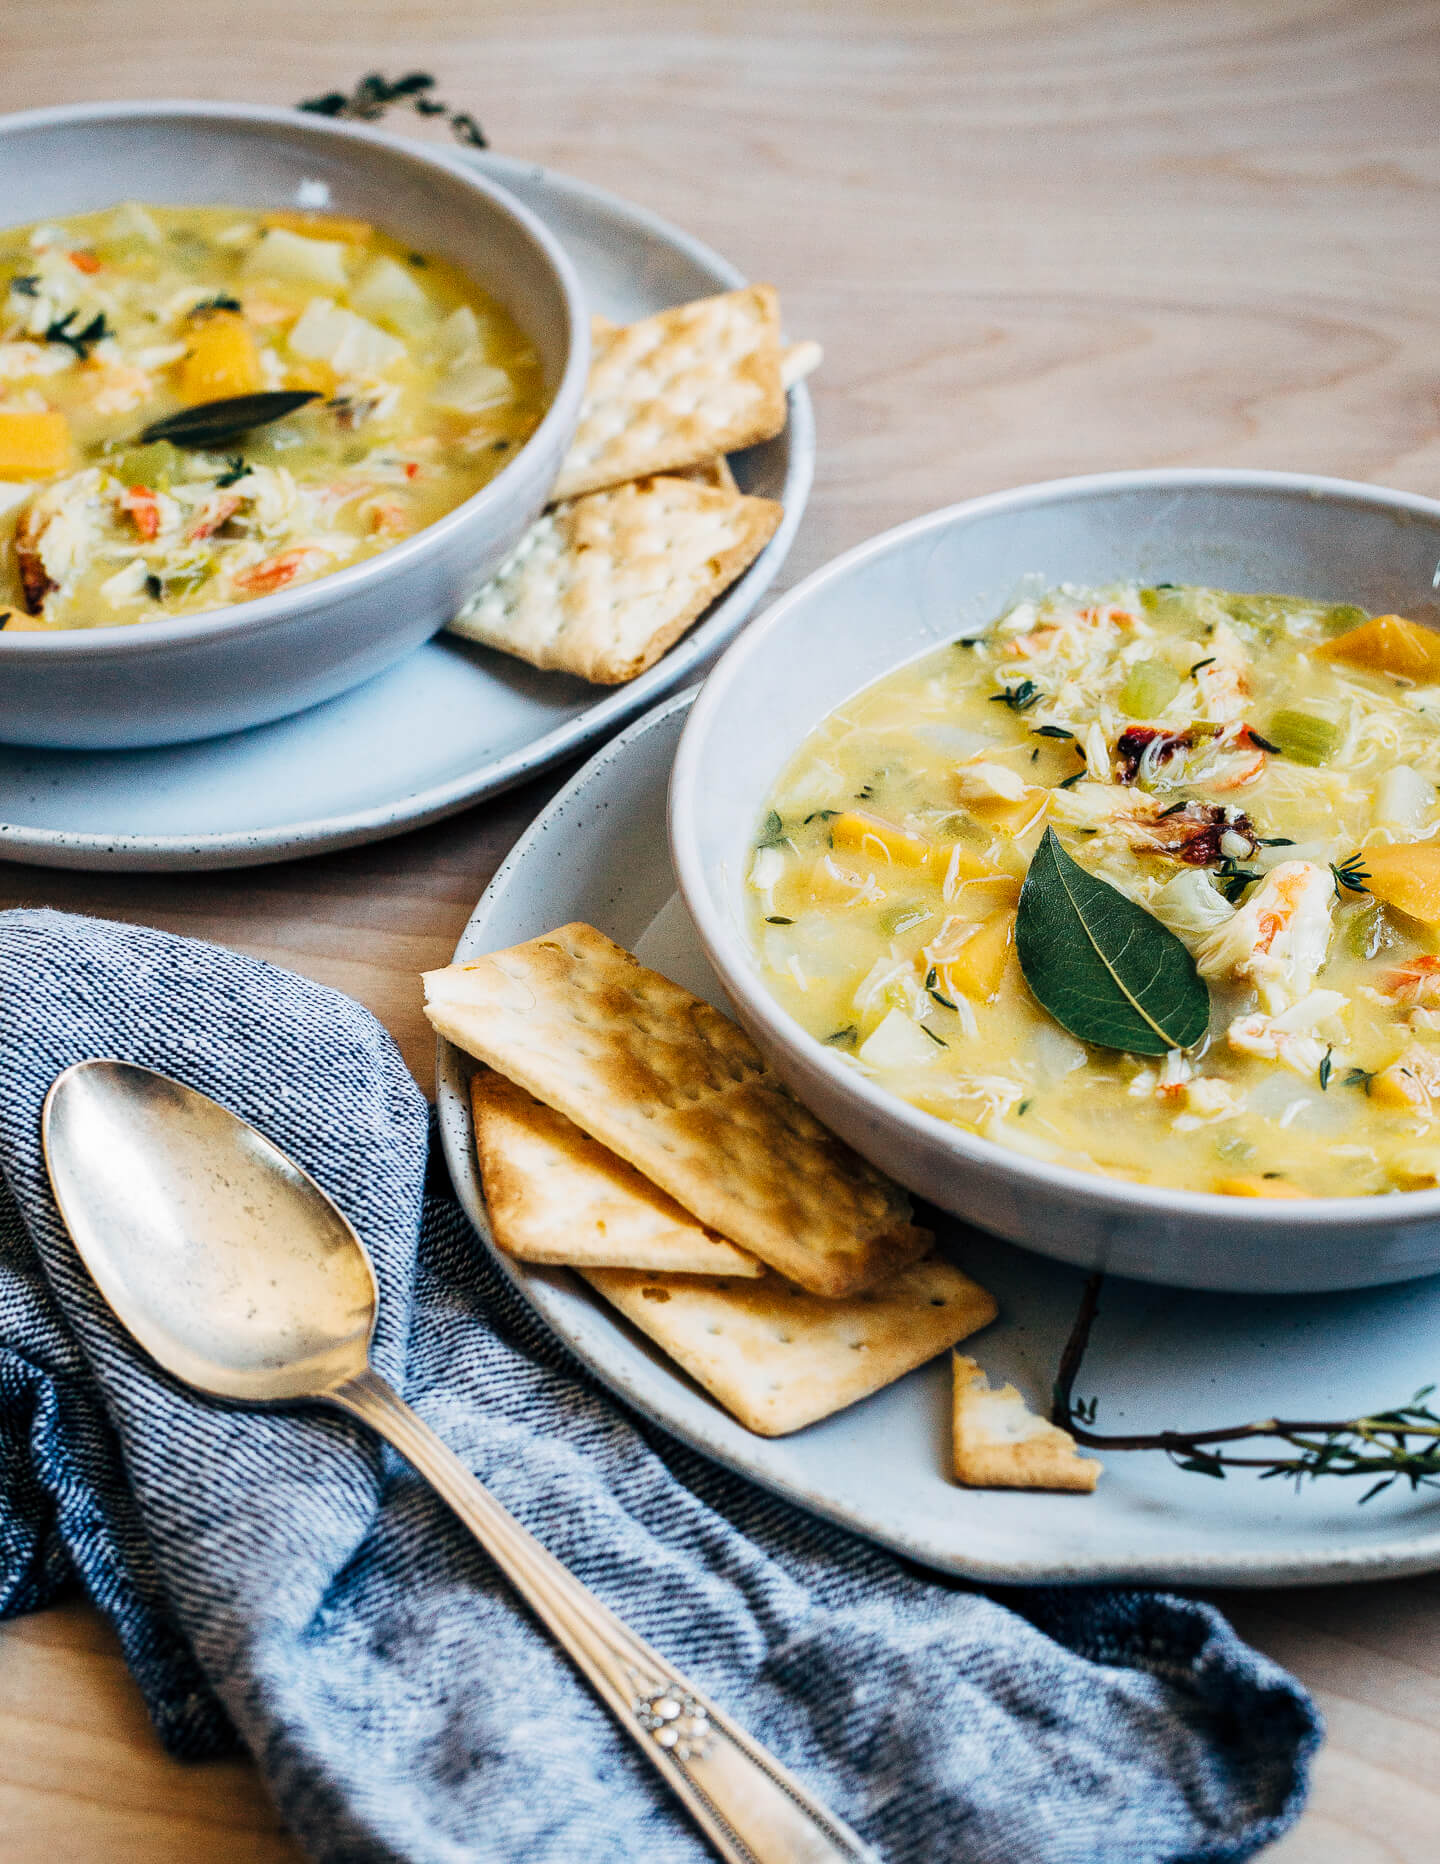 A wintry Dungeness crab chowder made with leeks, rutabagas, turnips, and fresh herbs.